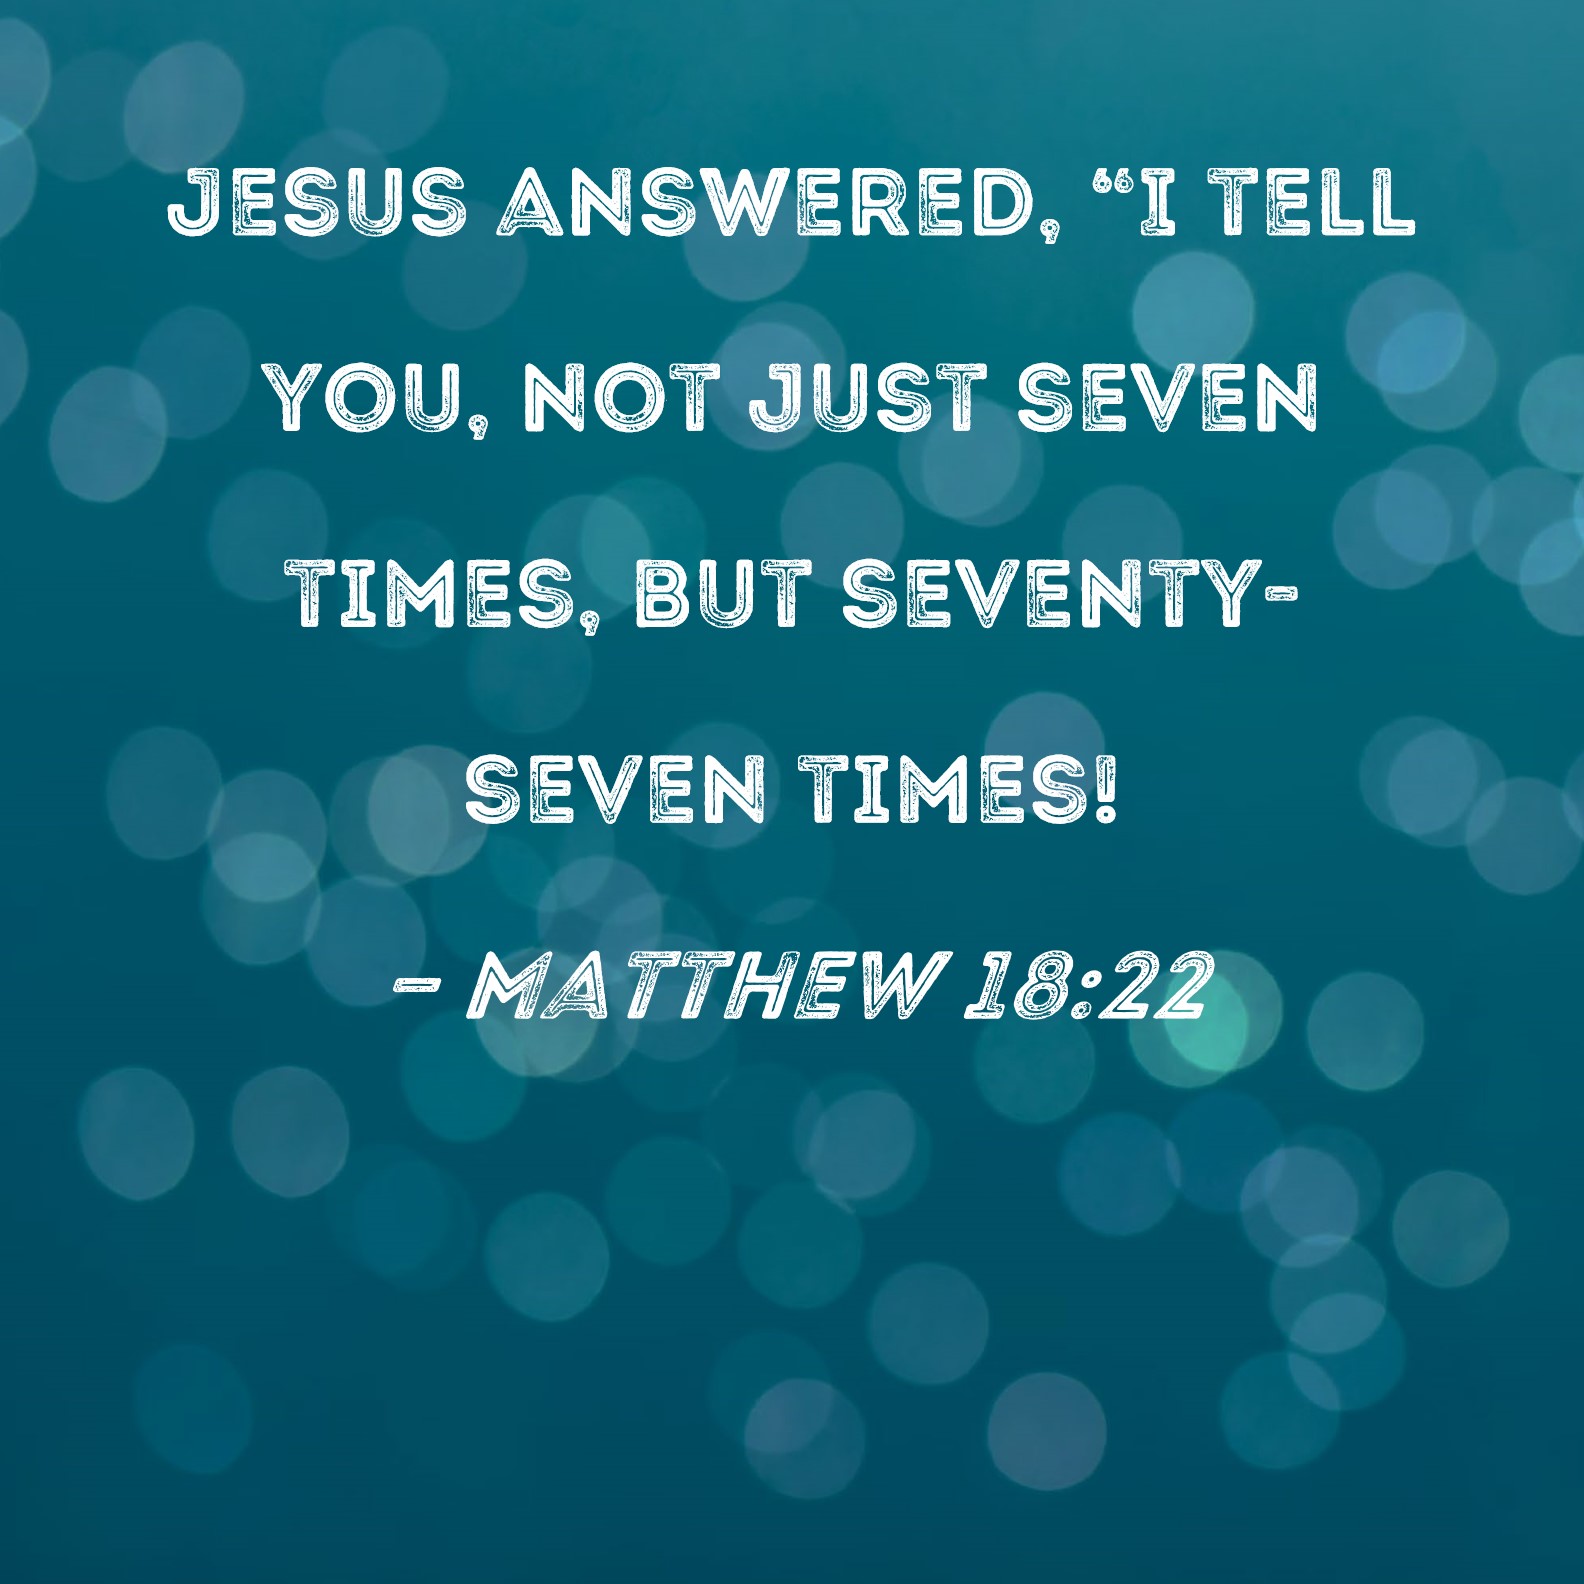 matthew-18-22-jesus-answered-i-tell-you-not-just-seven-times-but